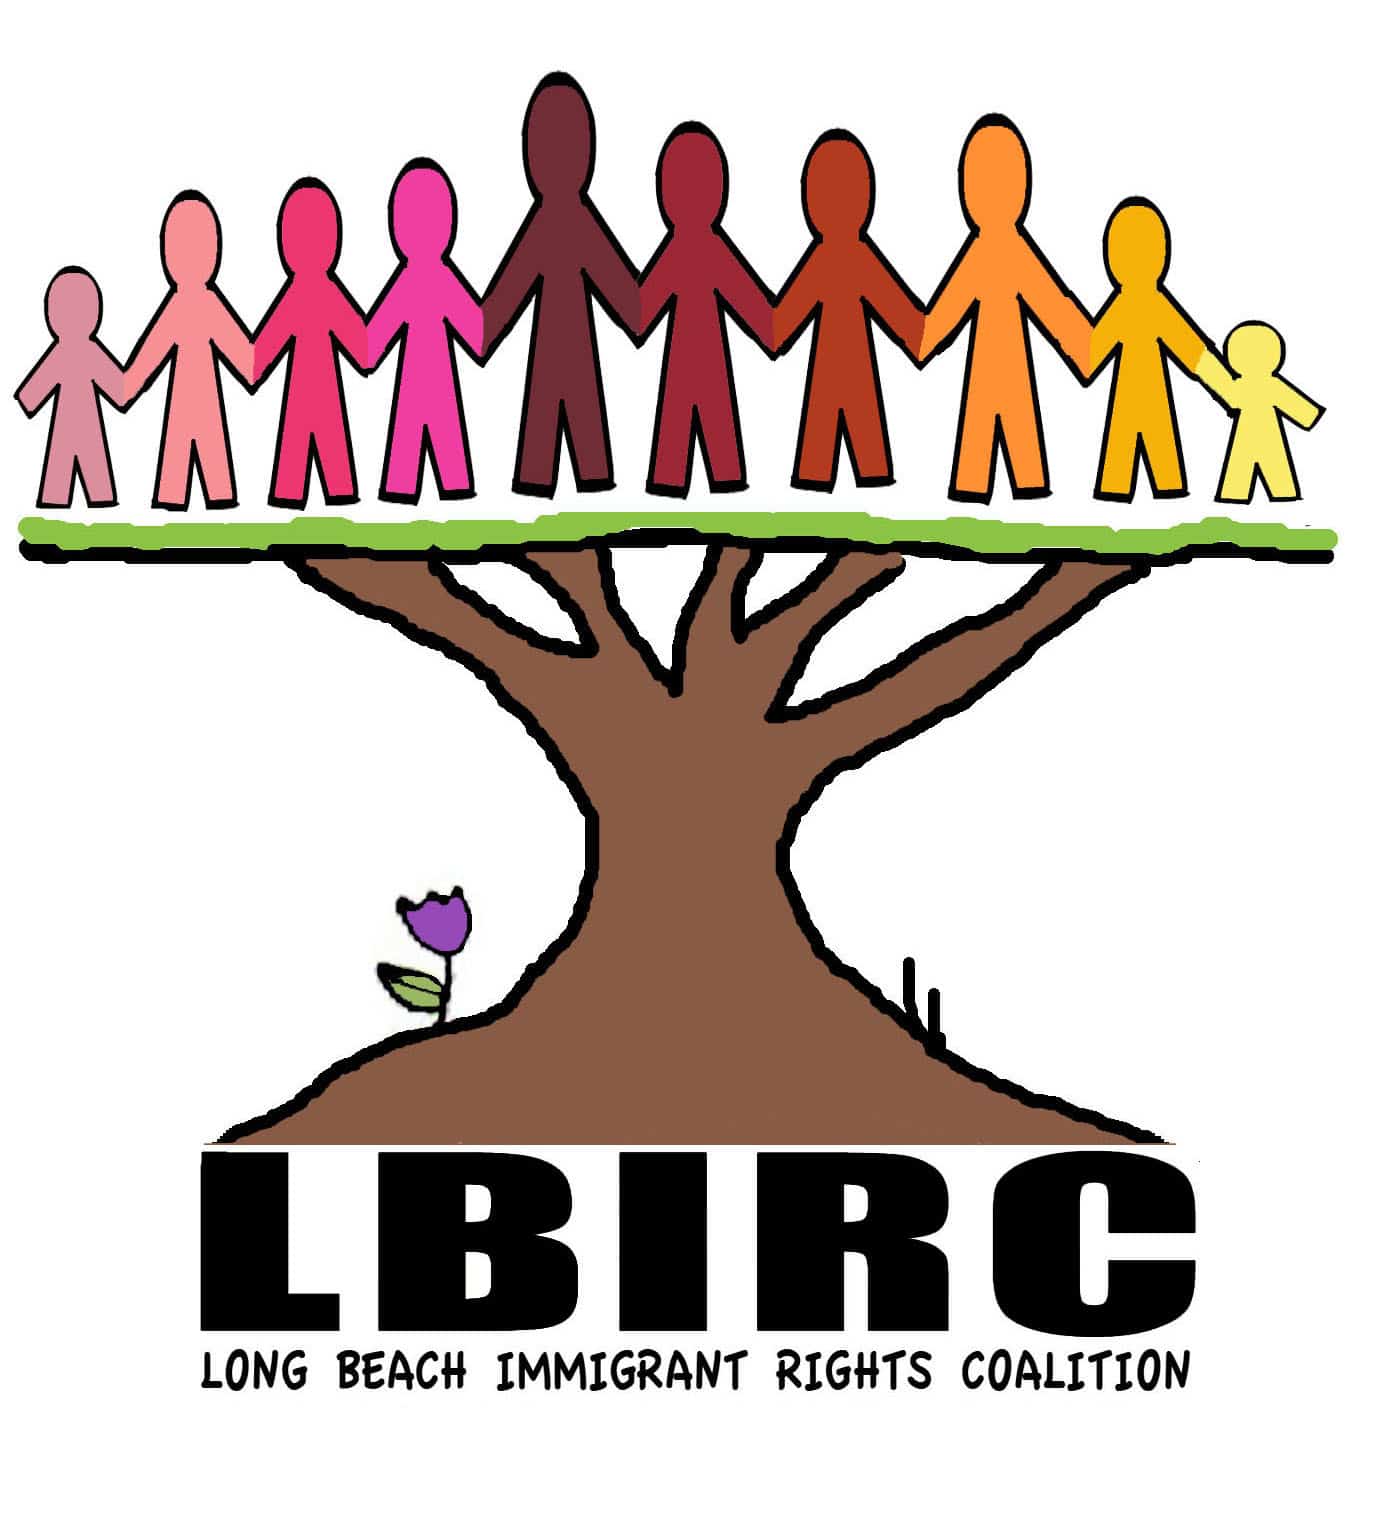 Logo of Long Beach Immigrant Rights Coalition